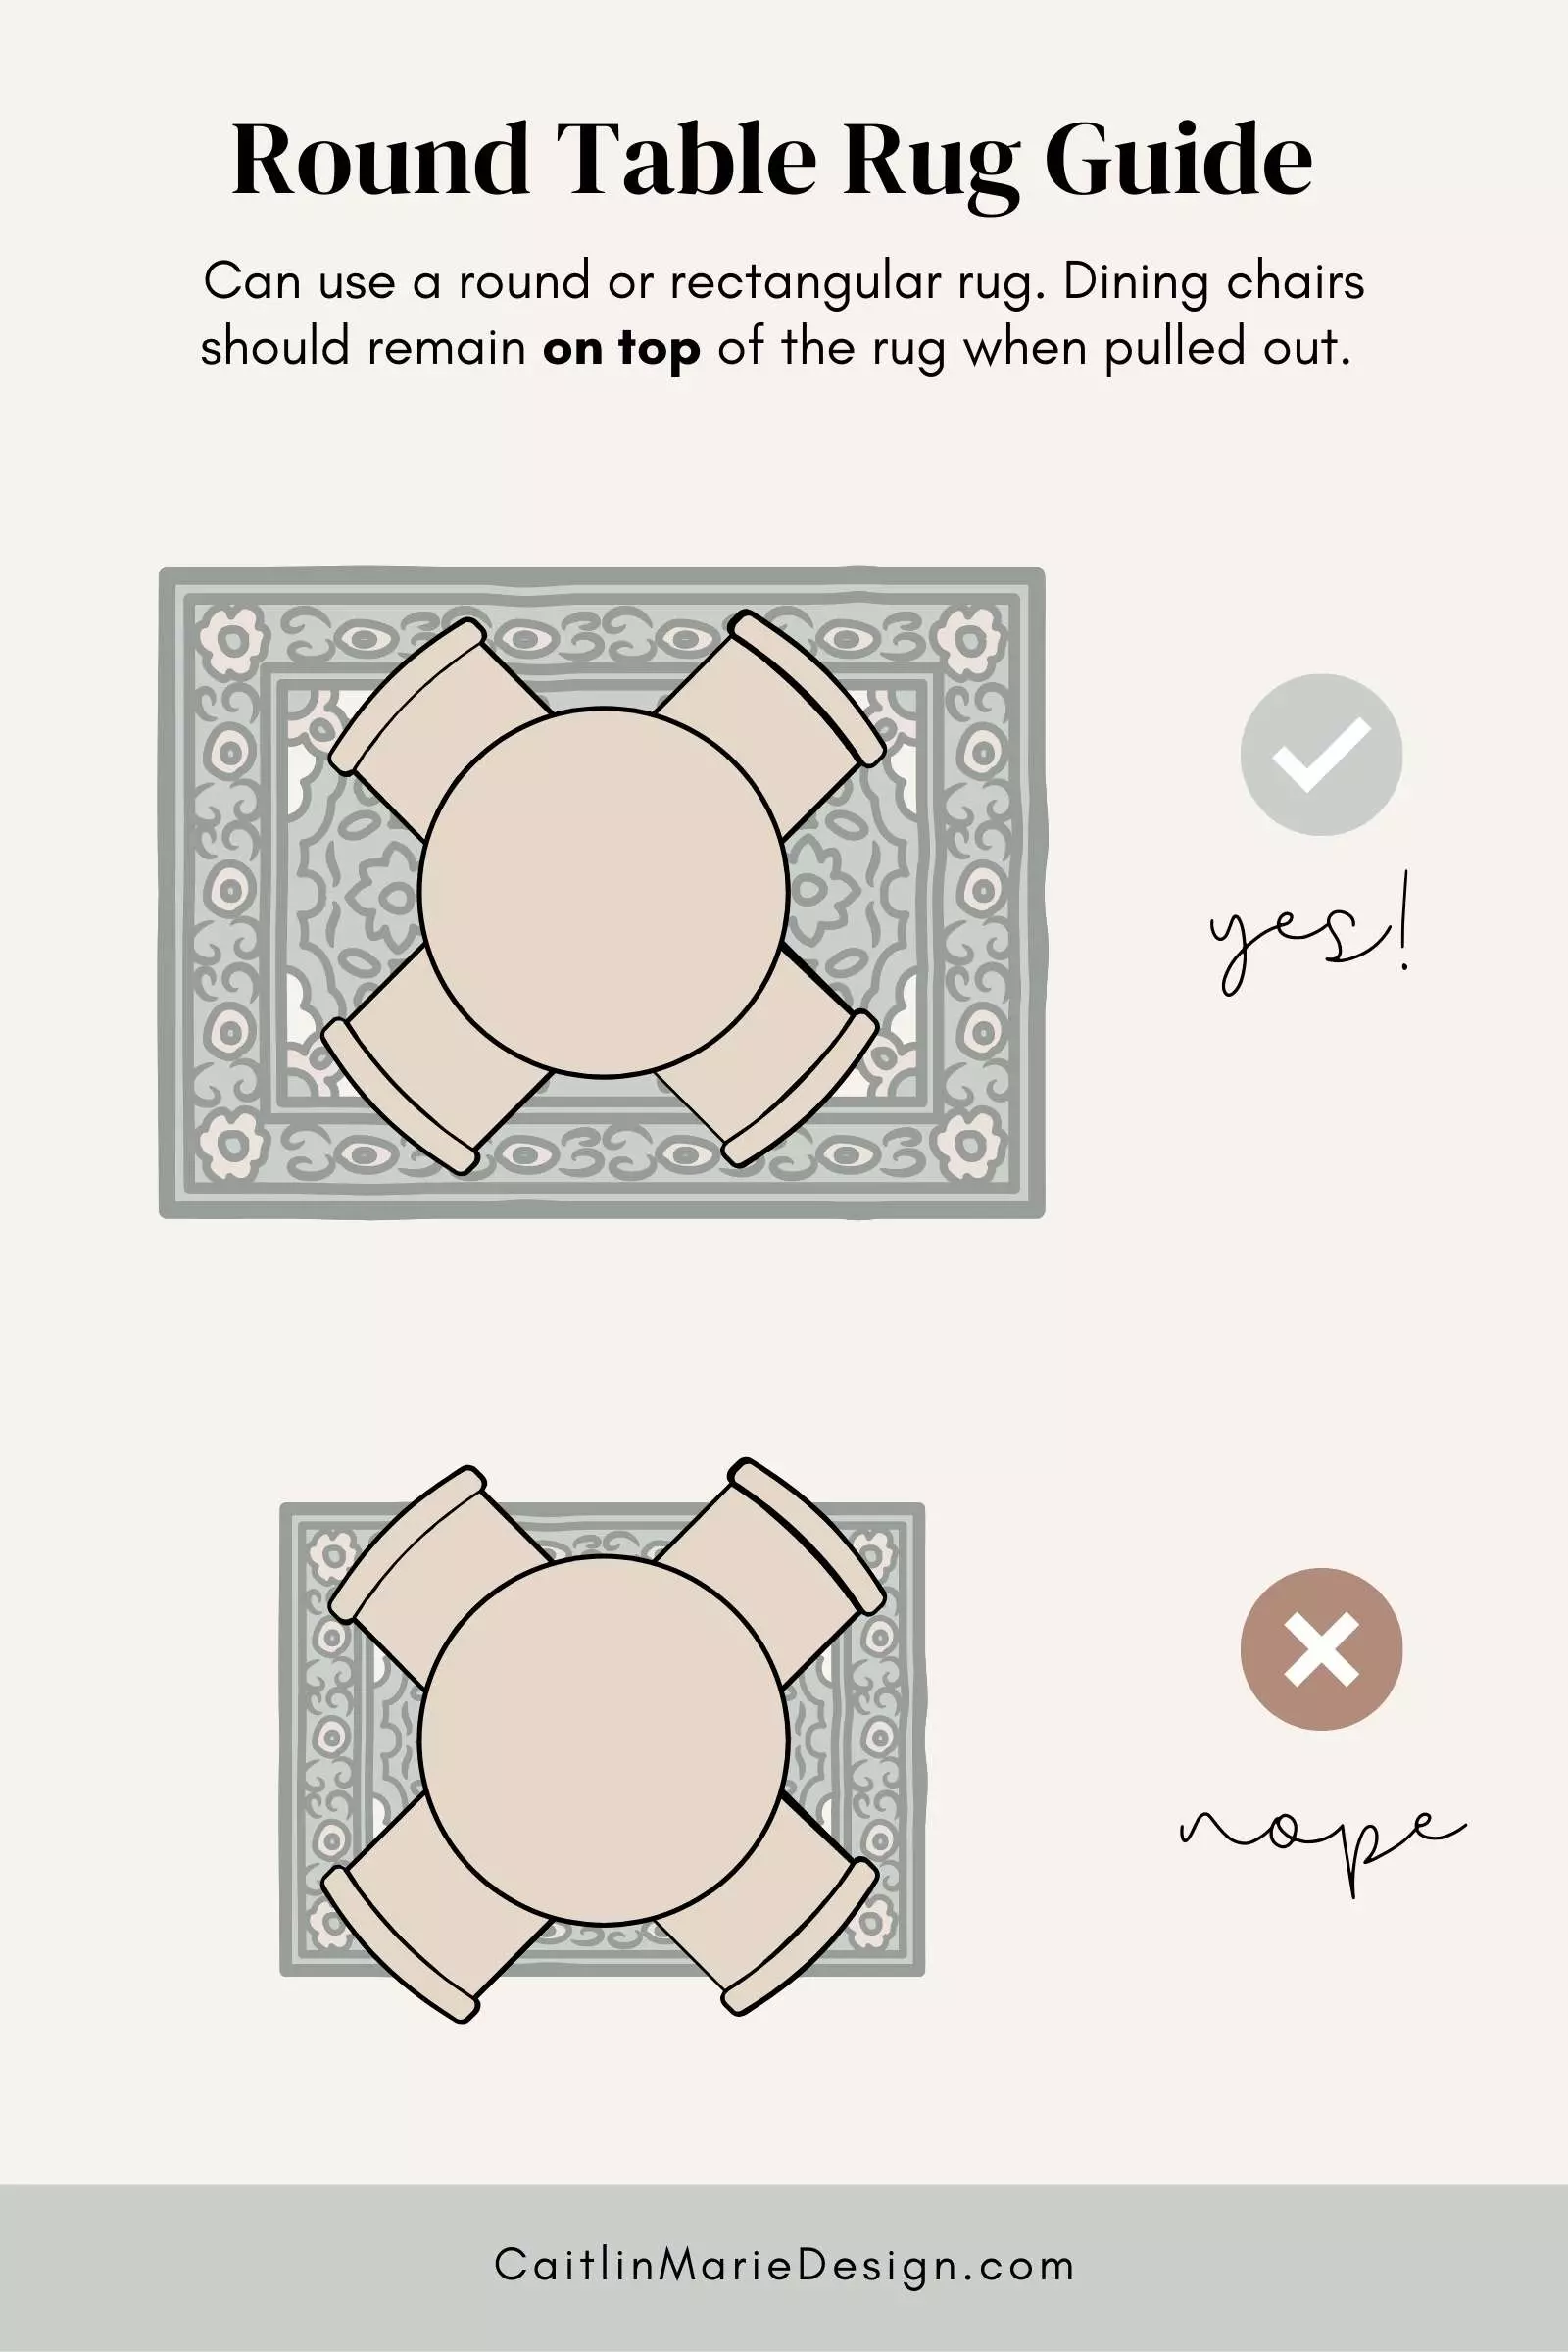 Dining Room Rug Size Guide for a Round Dining Table: Use a round or rectangular rug. Dining chairs should remain on top of the rug when pulled out.